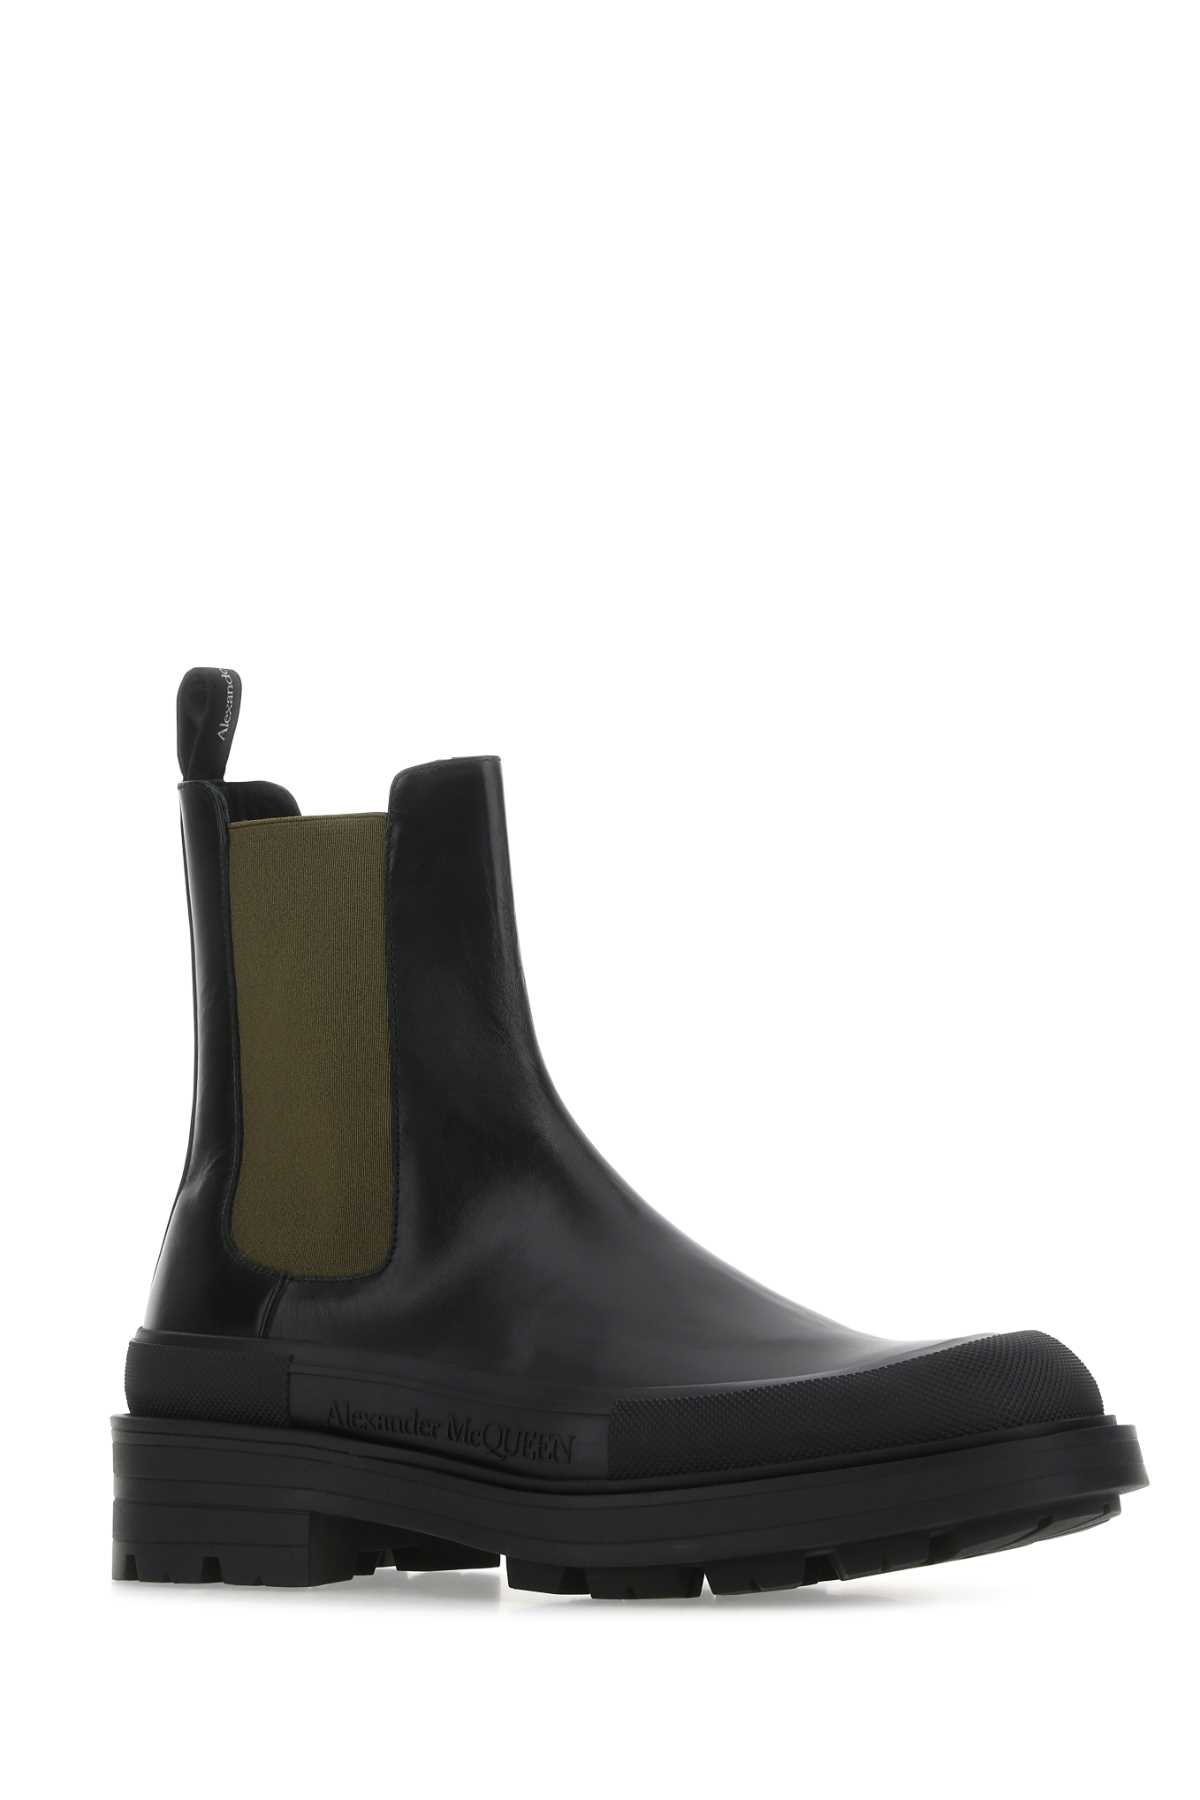 ALEXANDER MCQUEEN BLACK LEATHER BOXCAR ANKLE BOOTS